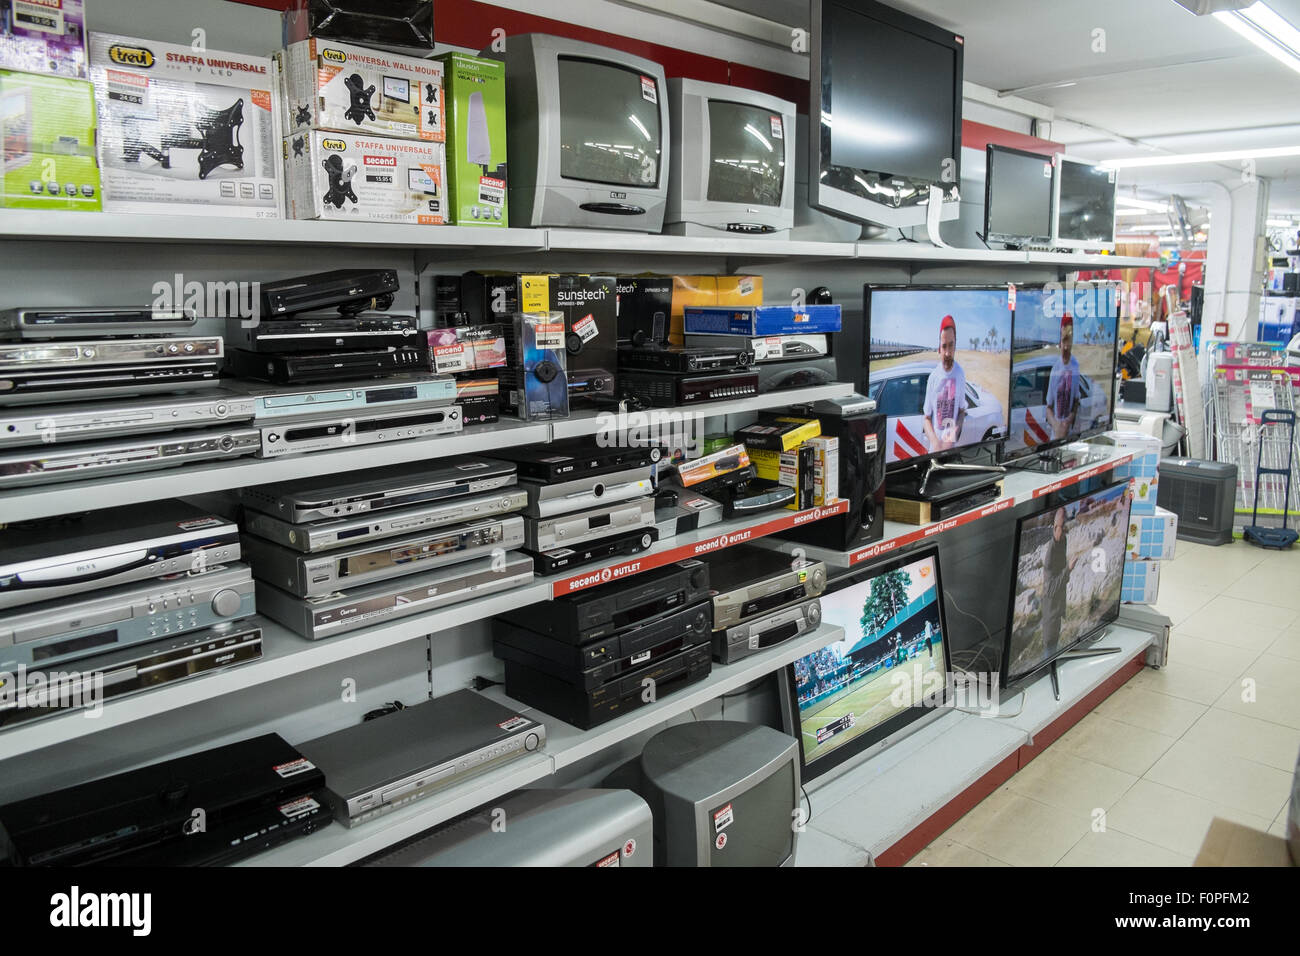 Televisions,TV,audio,visual items,Second hand goods for ...